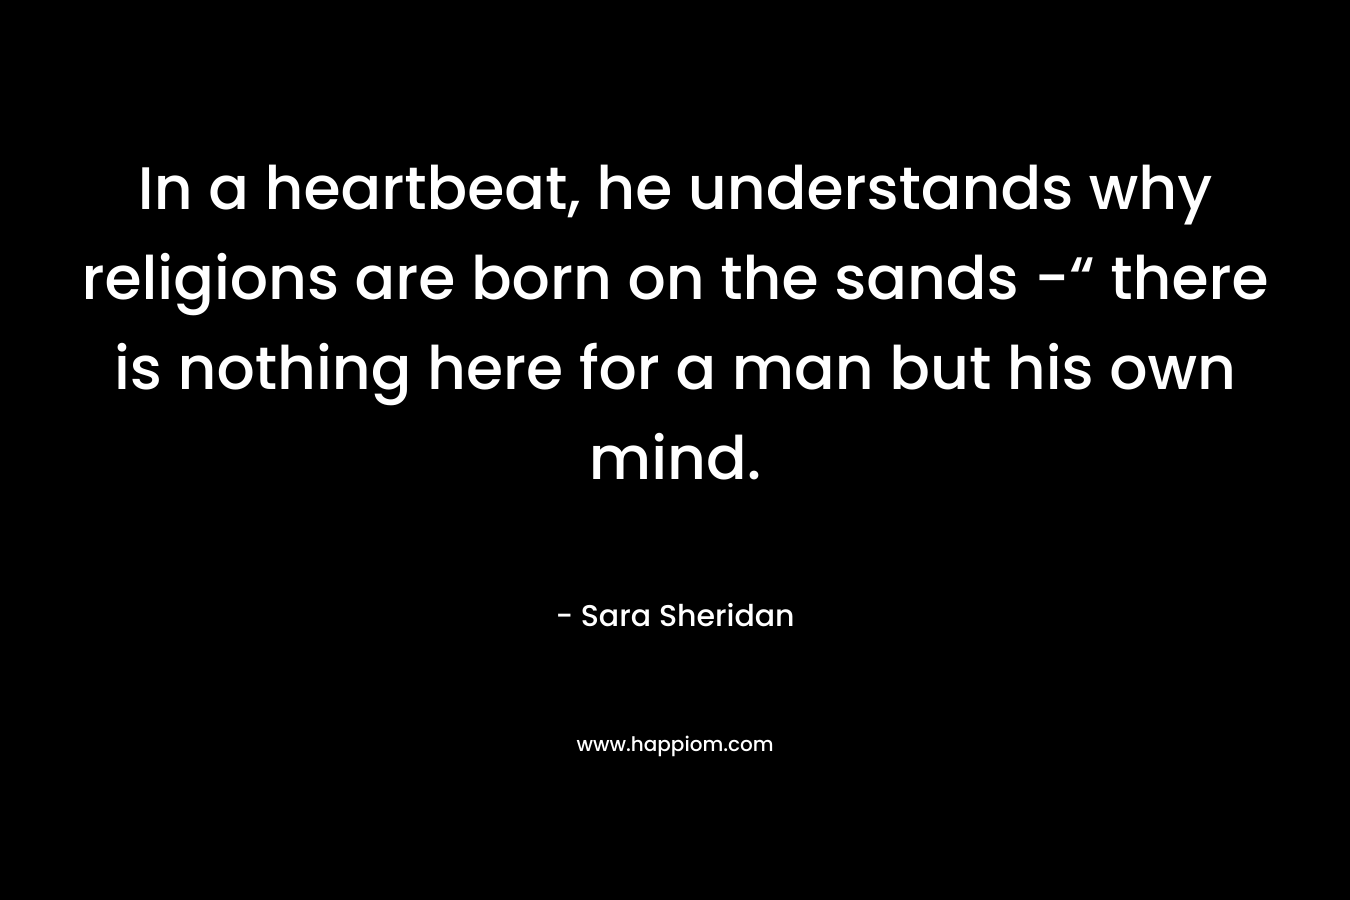 In a heartbeat, he understands why religions are born on the sands -“ there is nothing here for a man but his own mind. – Sara Sheridan